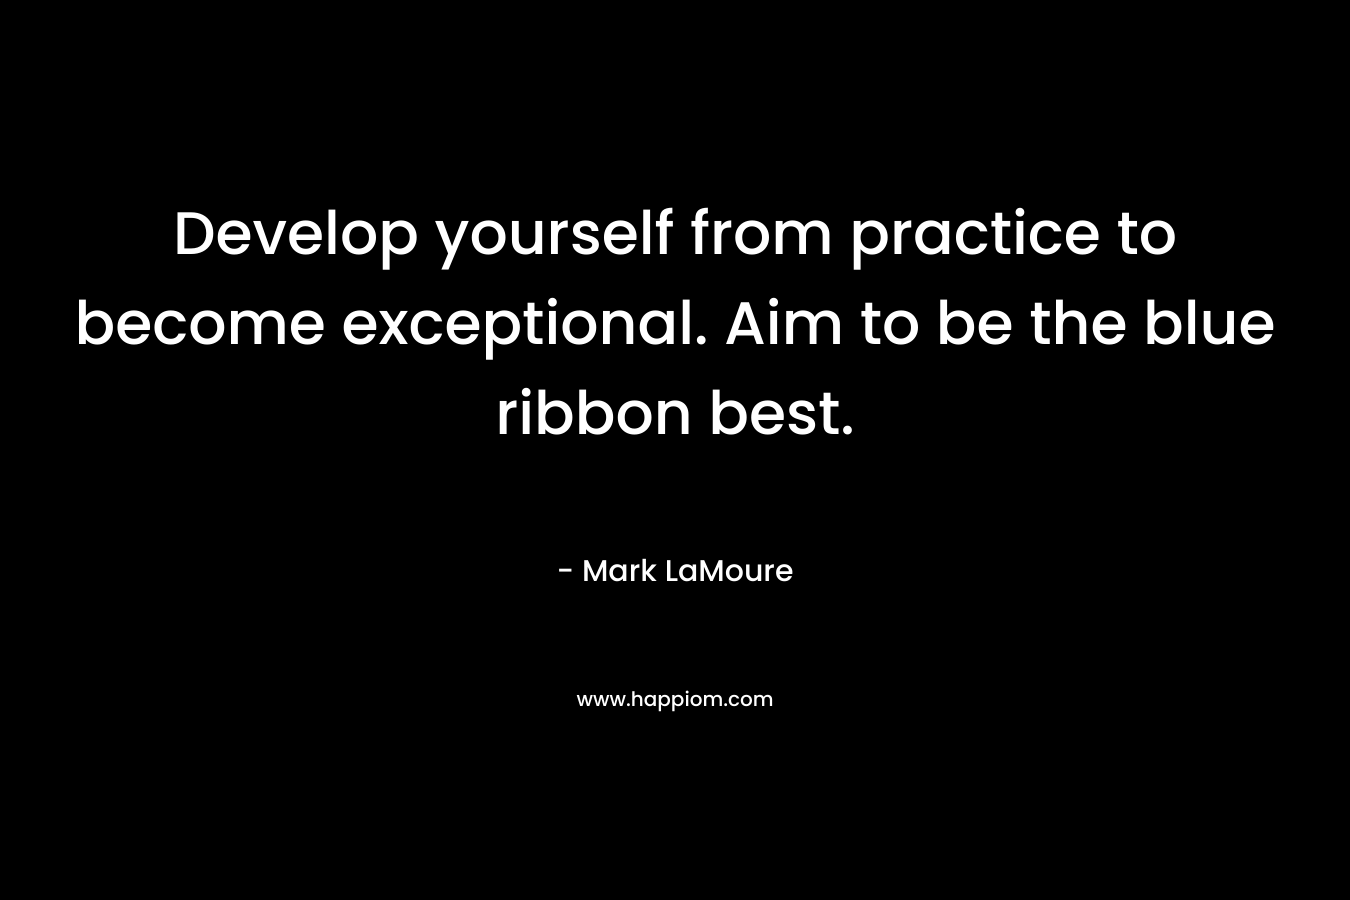 Develop yourself from practice to become exceptional. Aim to be the blue ribbon best.